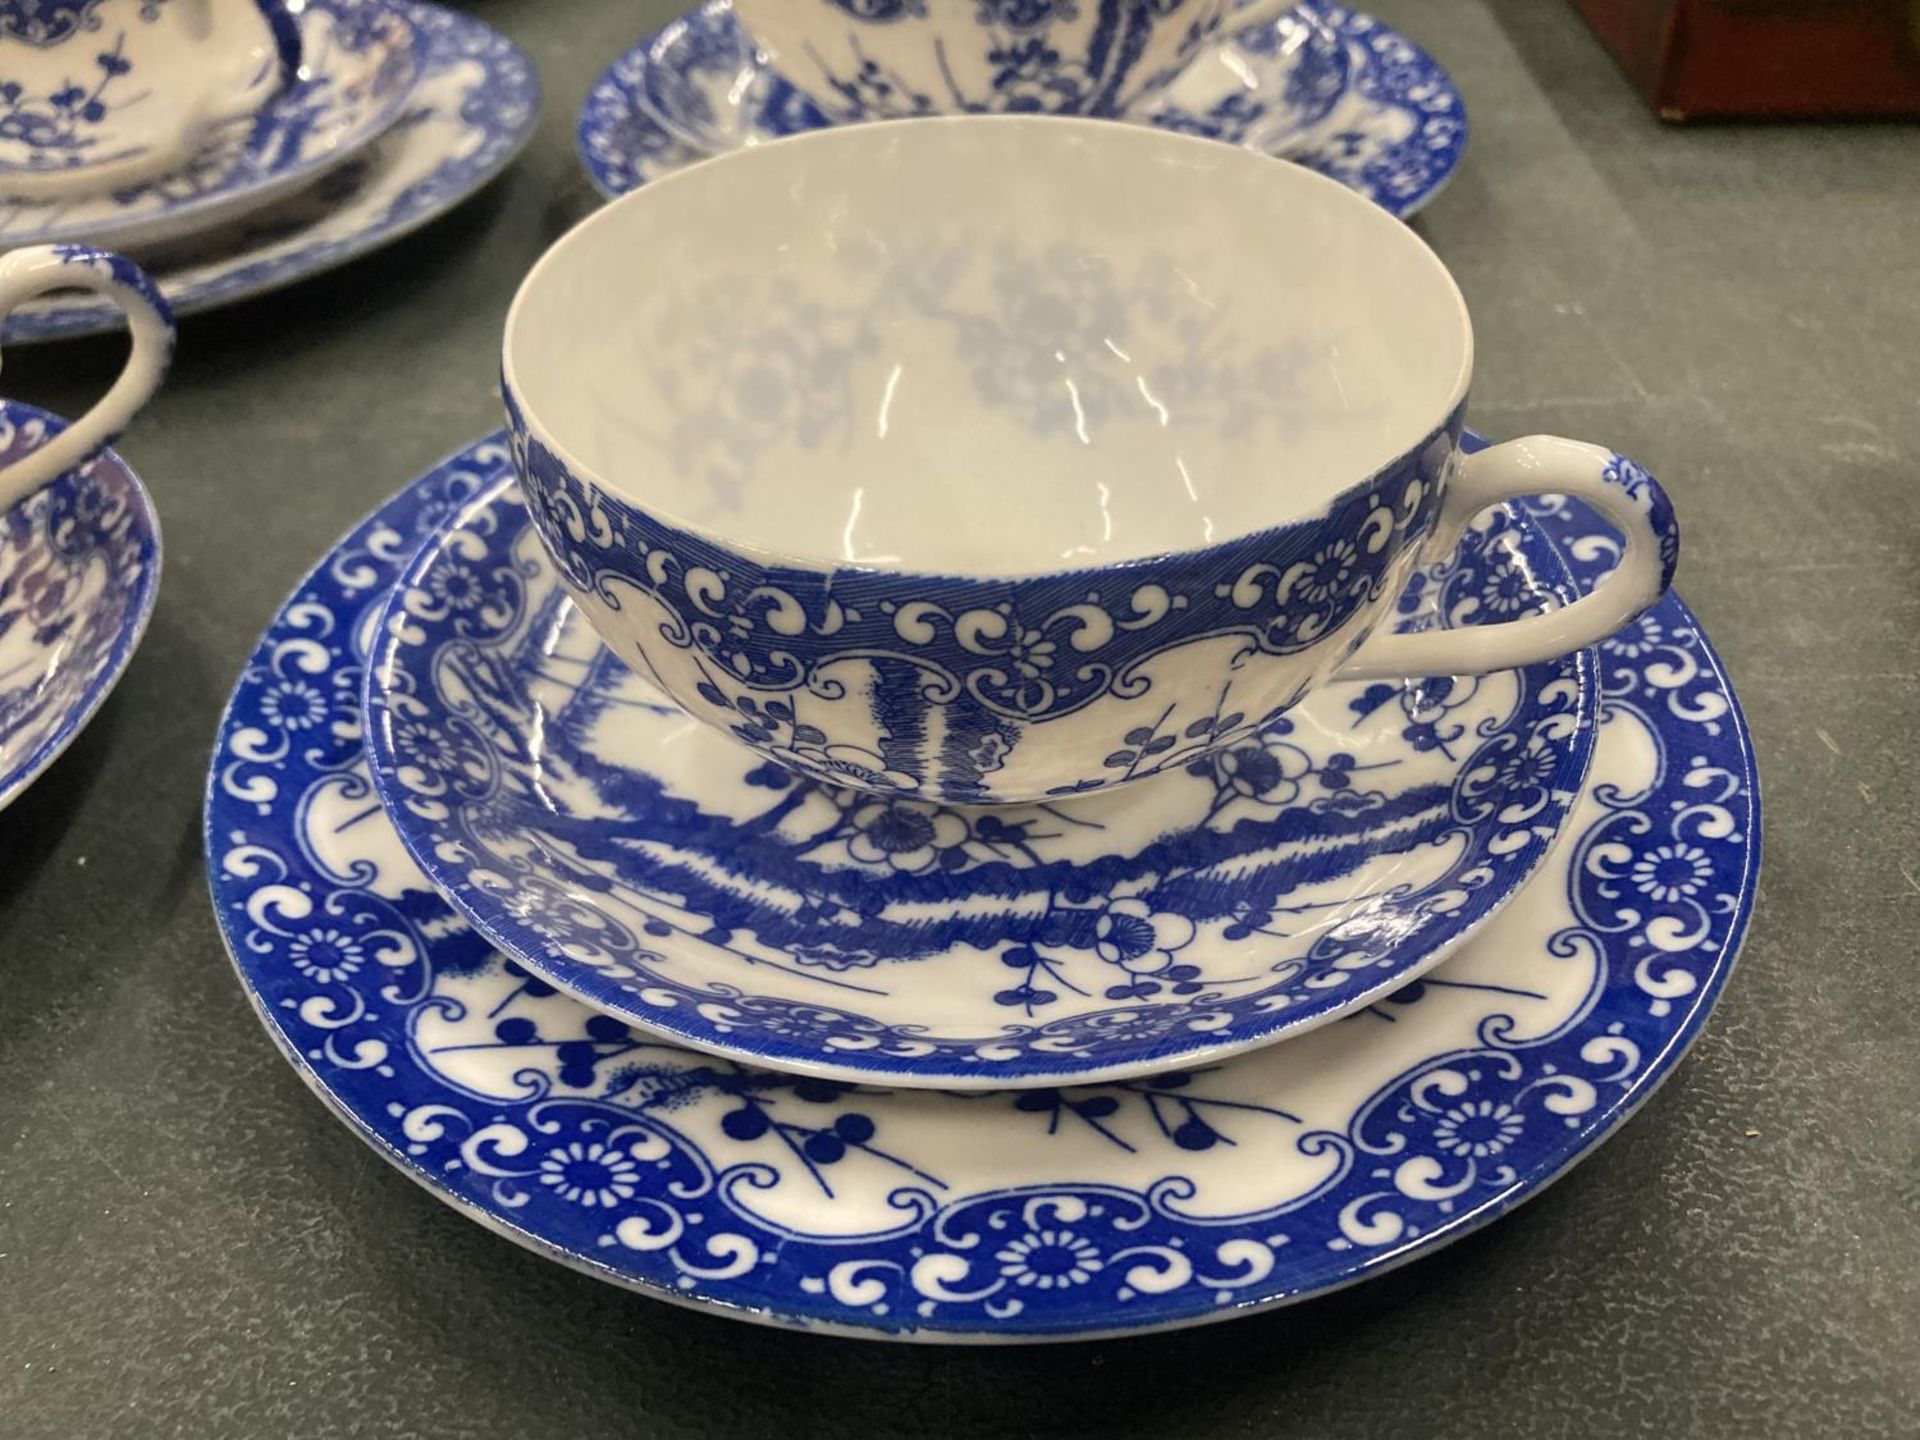 FIVE BLUE AND WHITE ORIENTAL EGGSHELL TEACUPS, SAUCERS AND FIVE SIDE PLATES - Image 2 of 5